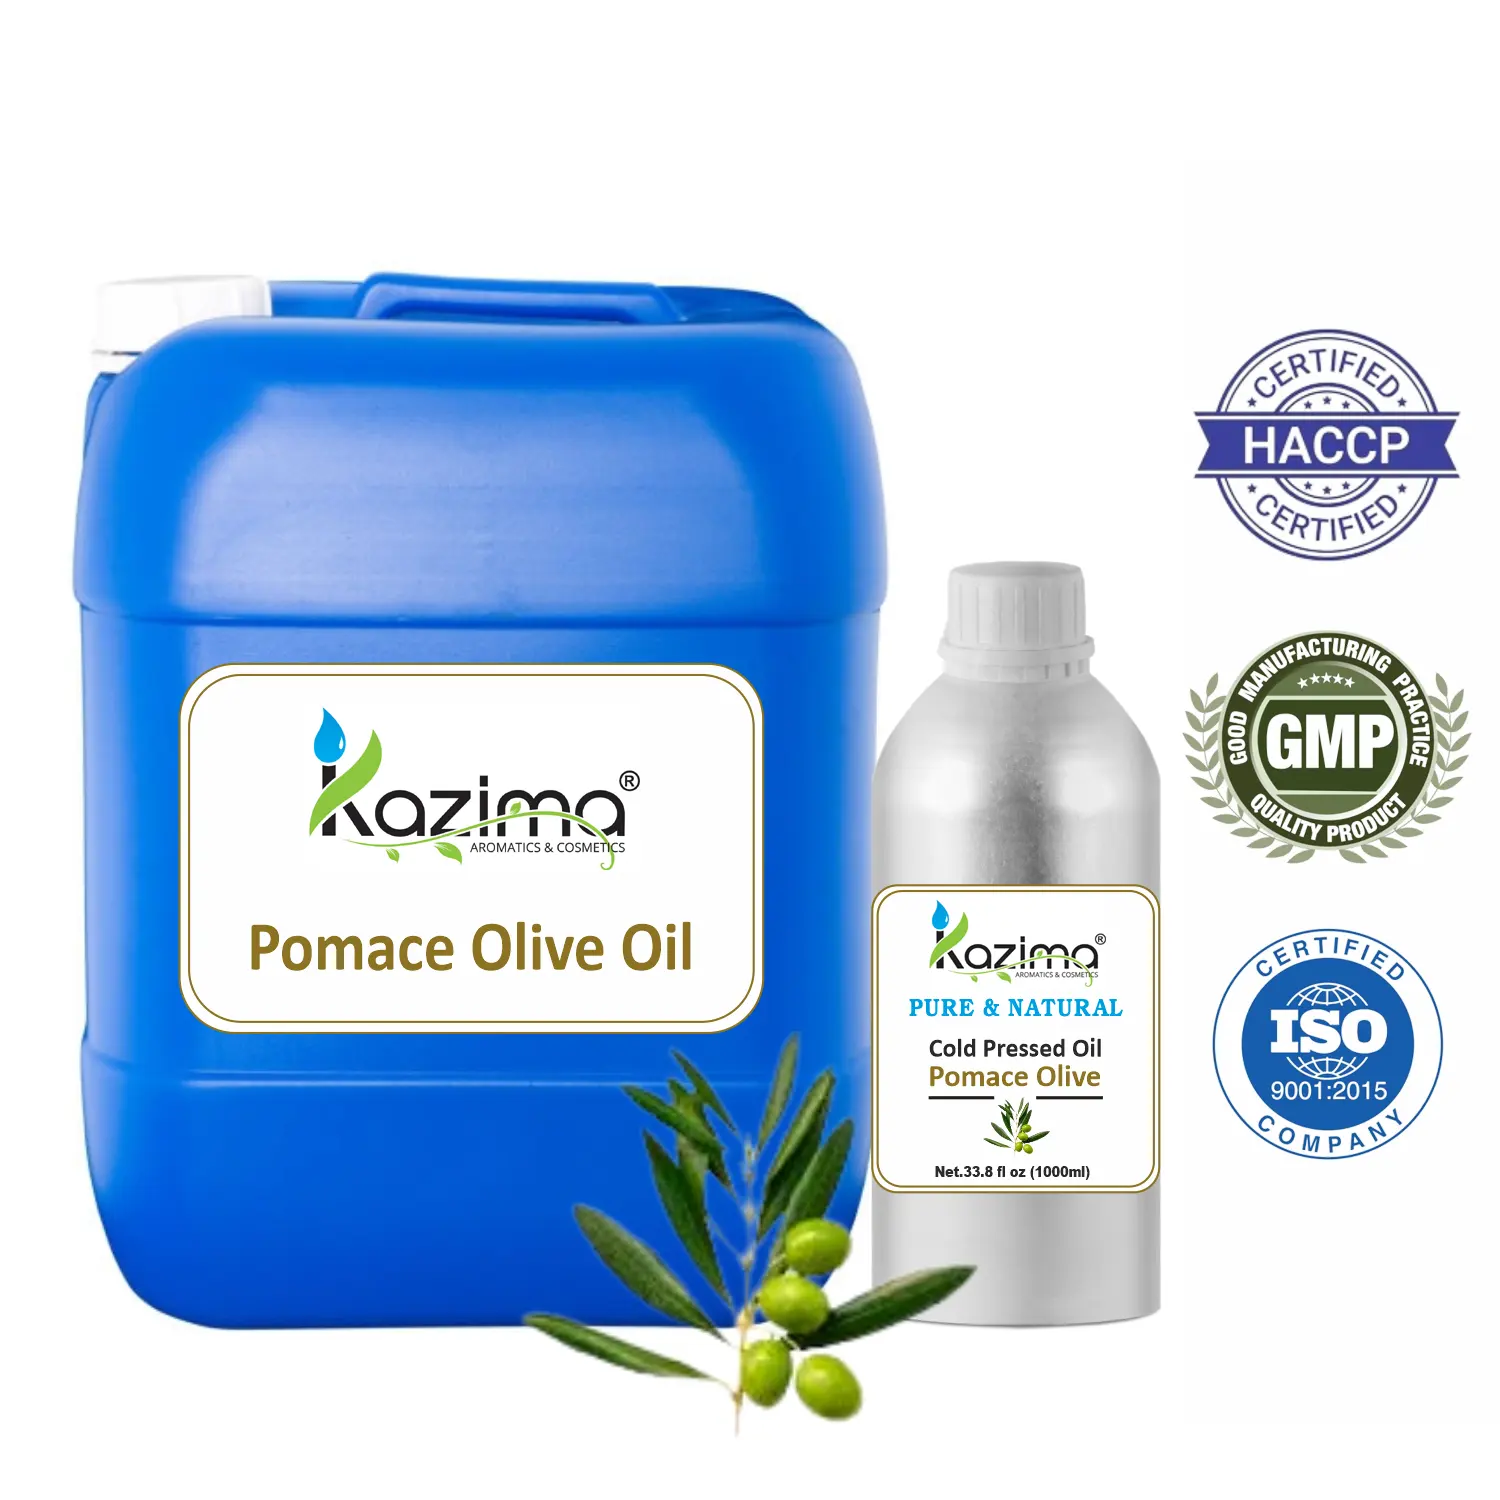 Pure & Natural Pomace Olive Carrier Oil bulk wholesale Lowest Price Direct from Manufacturer, Supplier & Exporter